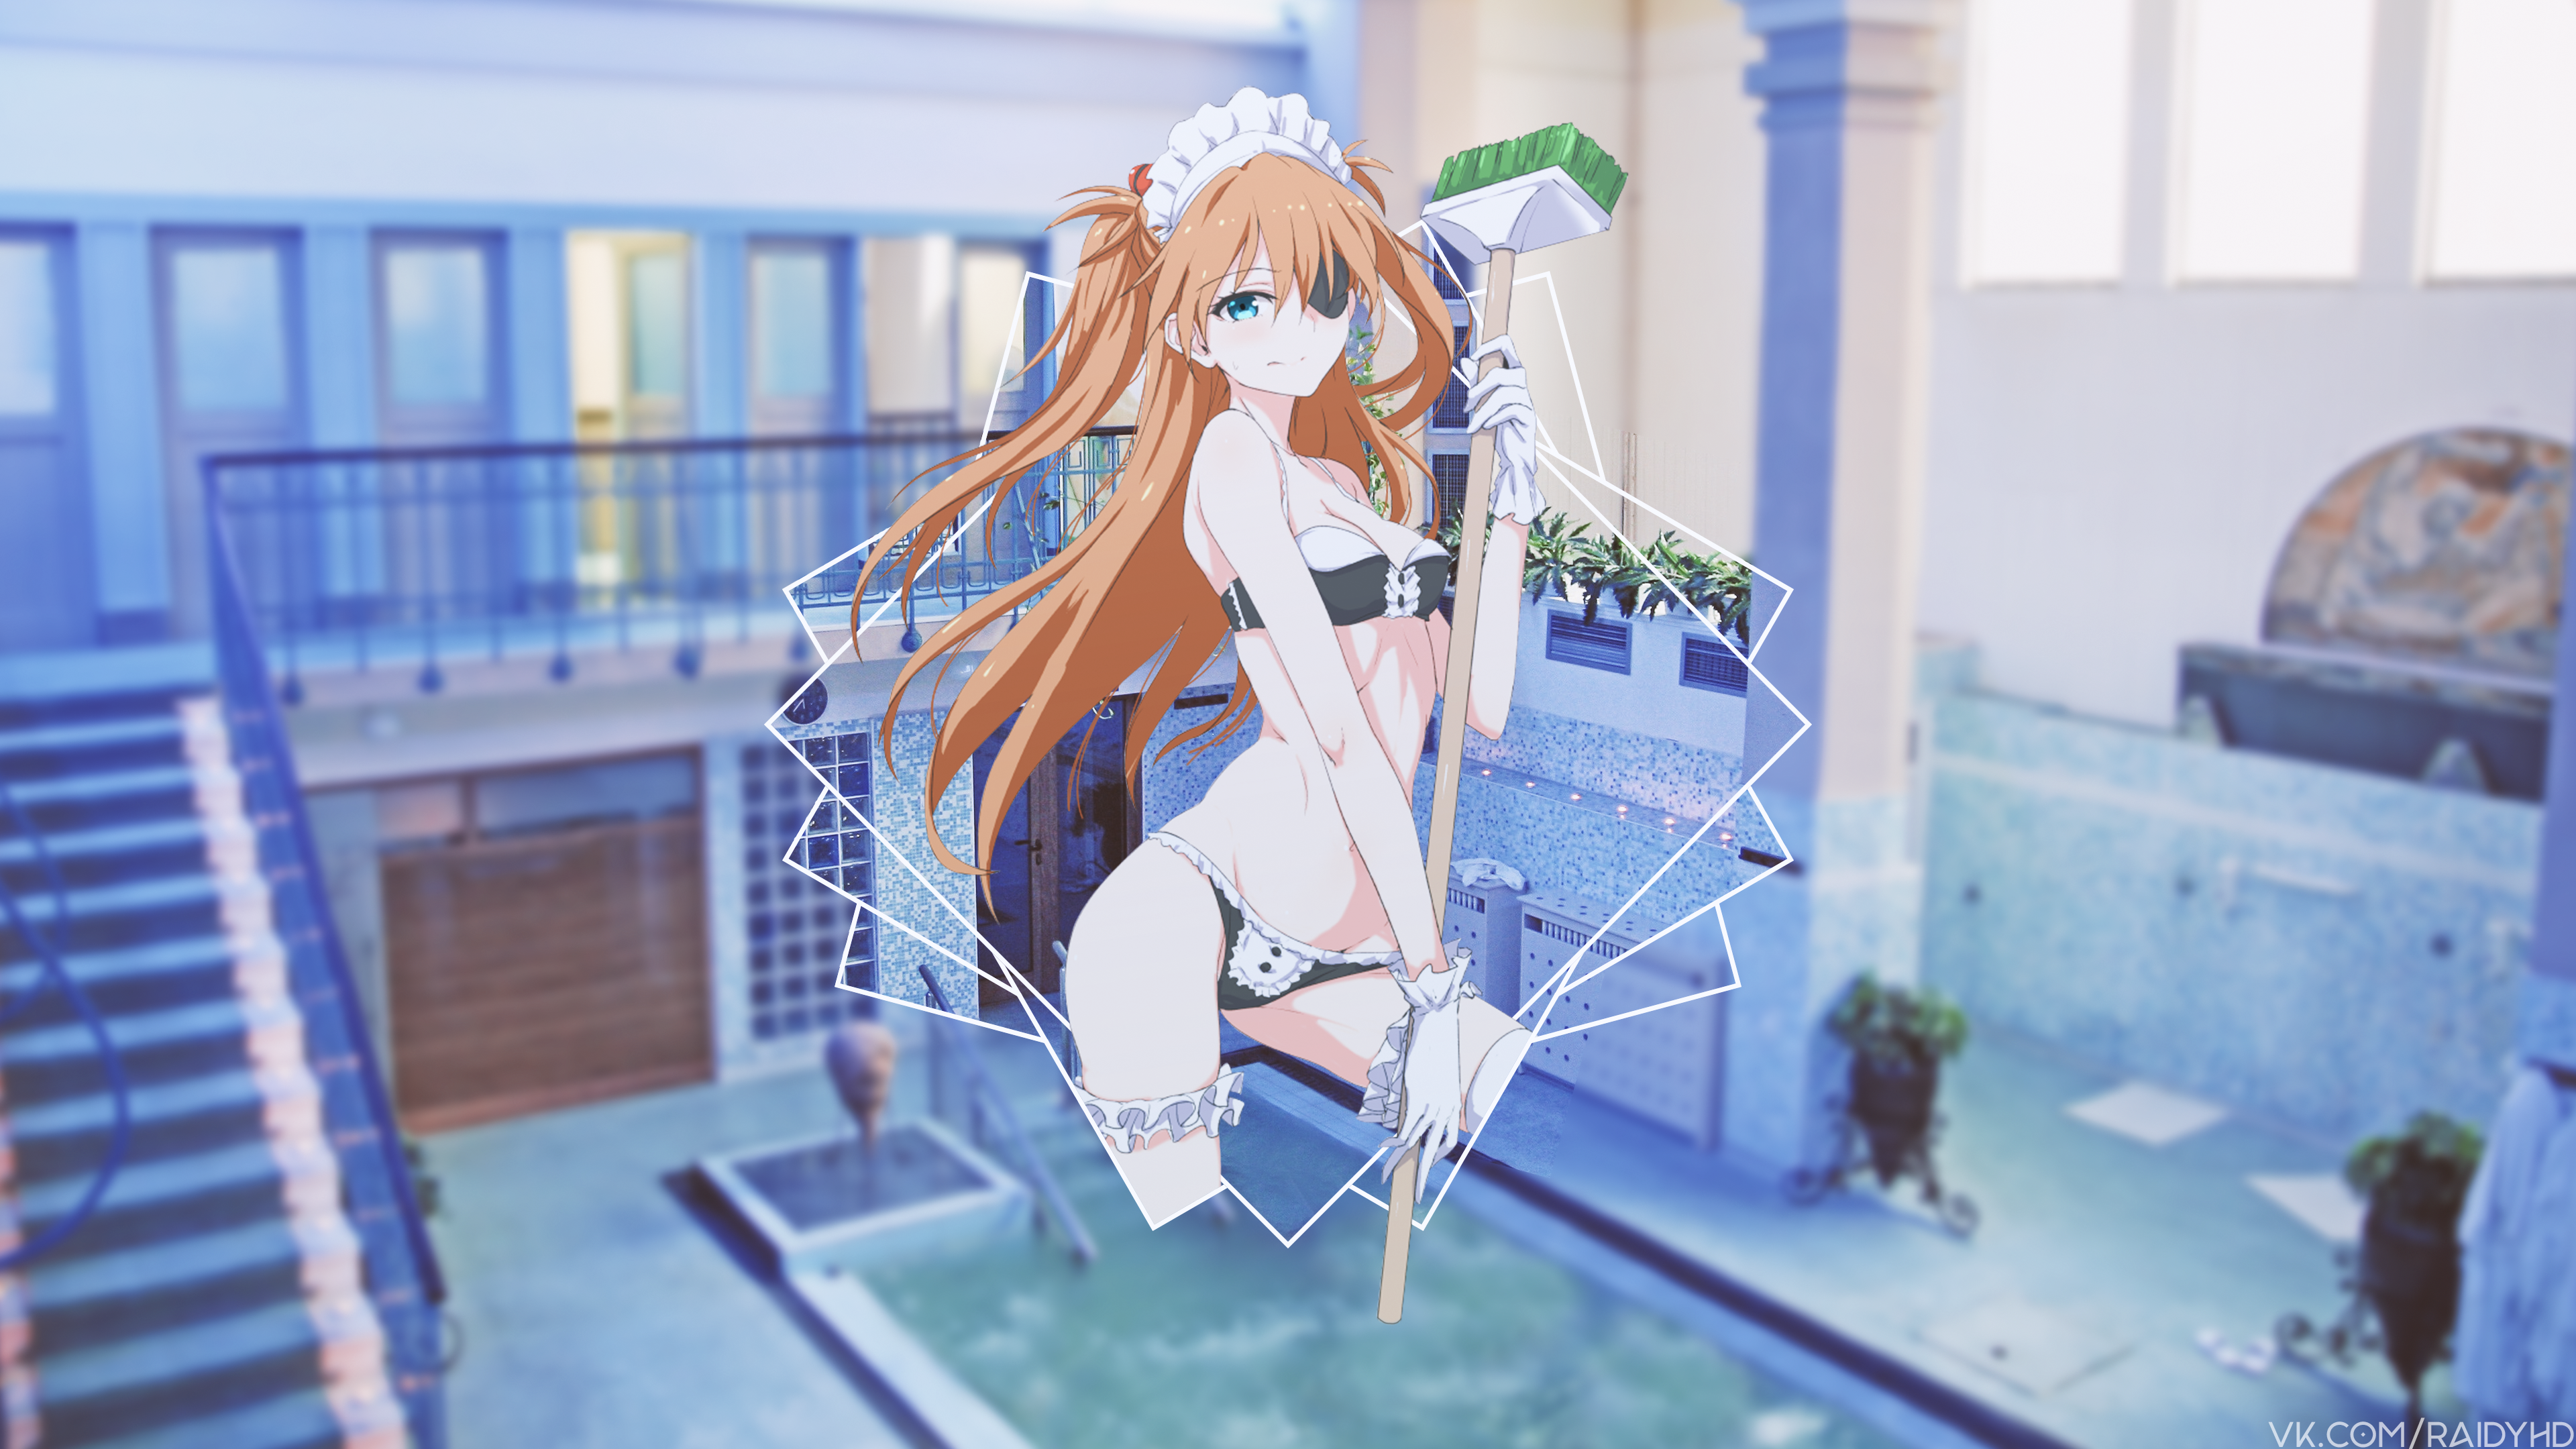 Anime 3840x2160 anime girls picture-in-picture anime Asuka Langley Soryu Ne...